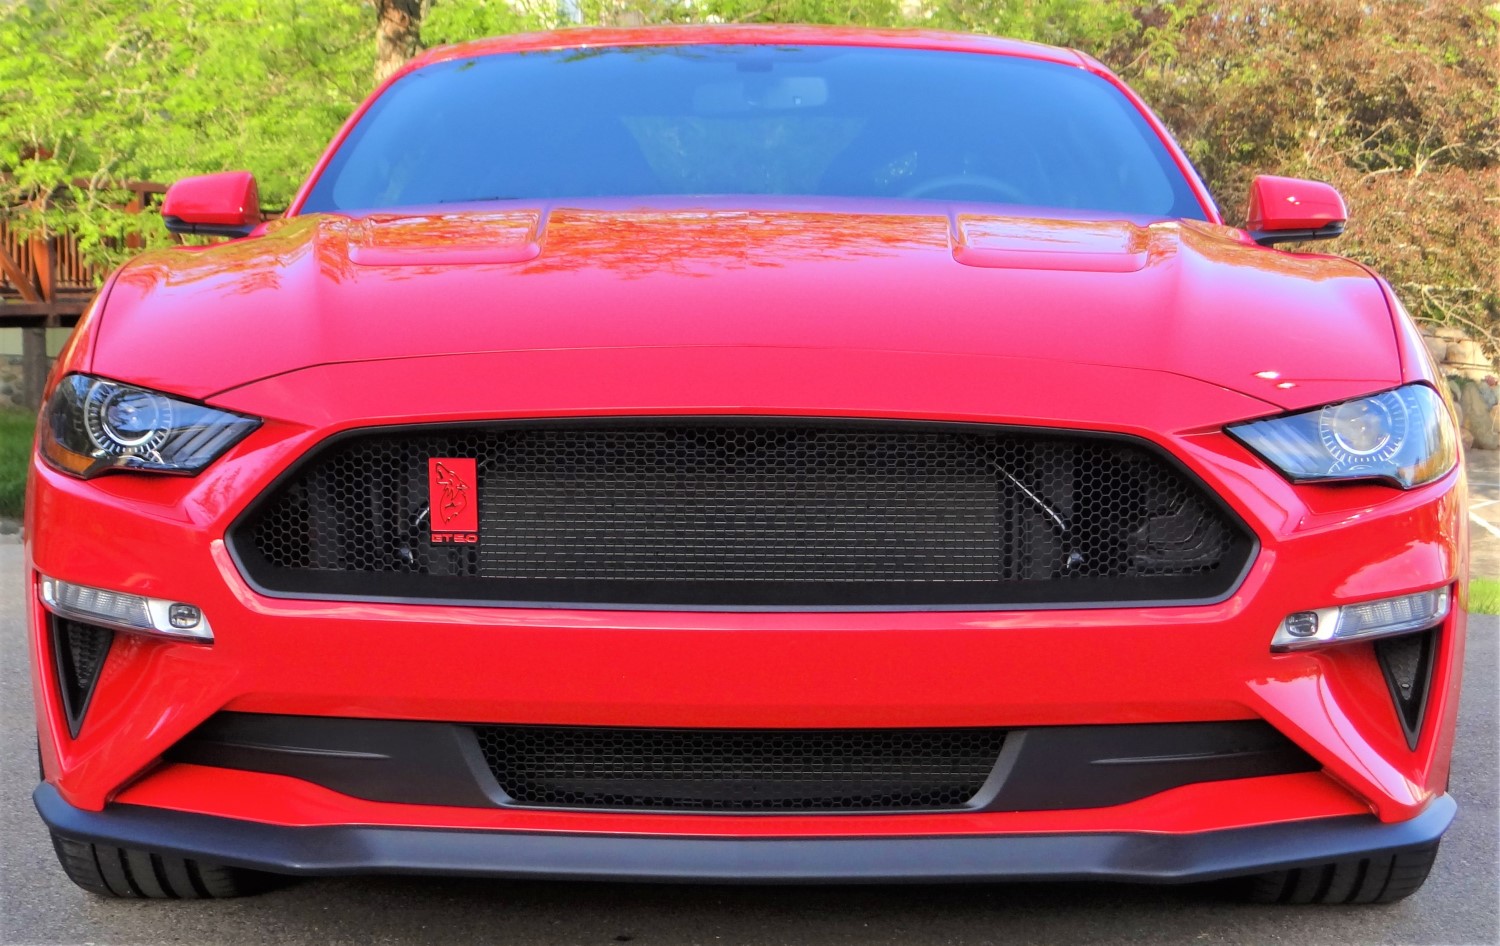 Hexagon Mesh Grille Upgrade for 2018 Ford Mustang Ecoboost: The Ultimate Style Boost